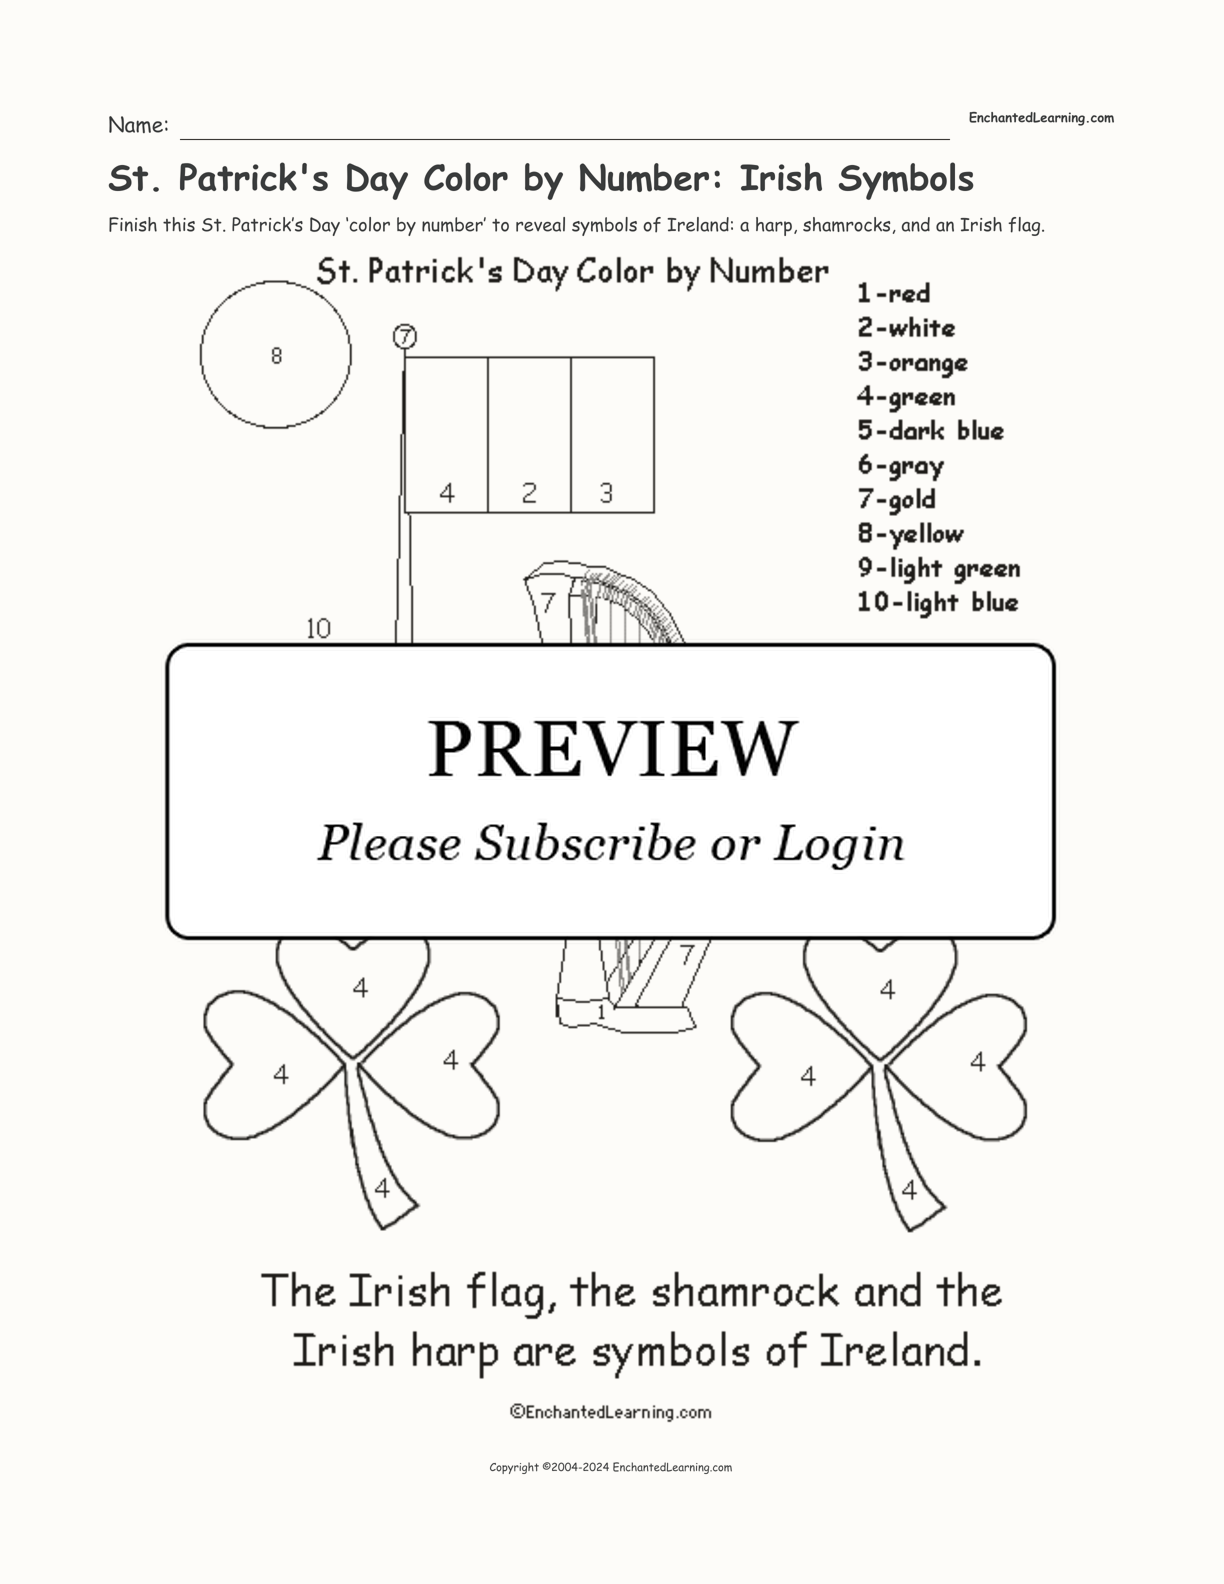 St. Patrick's Day Color by Number: Irish Symbols interactive printout page 1